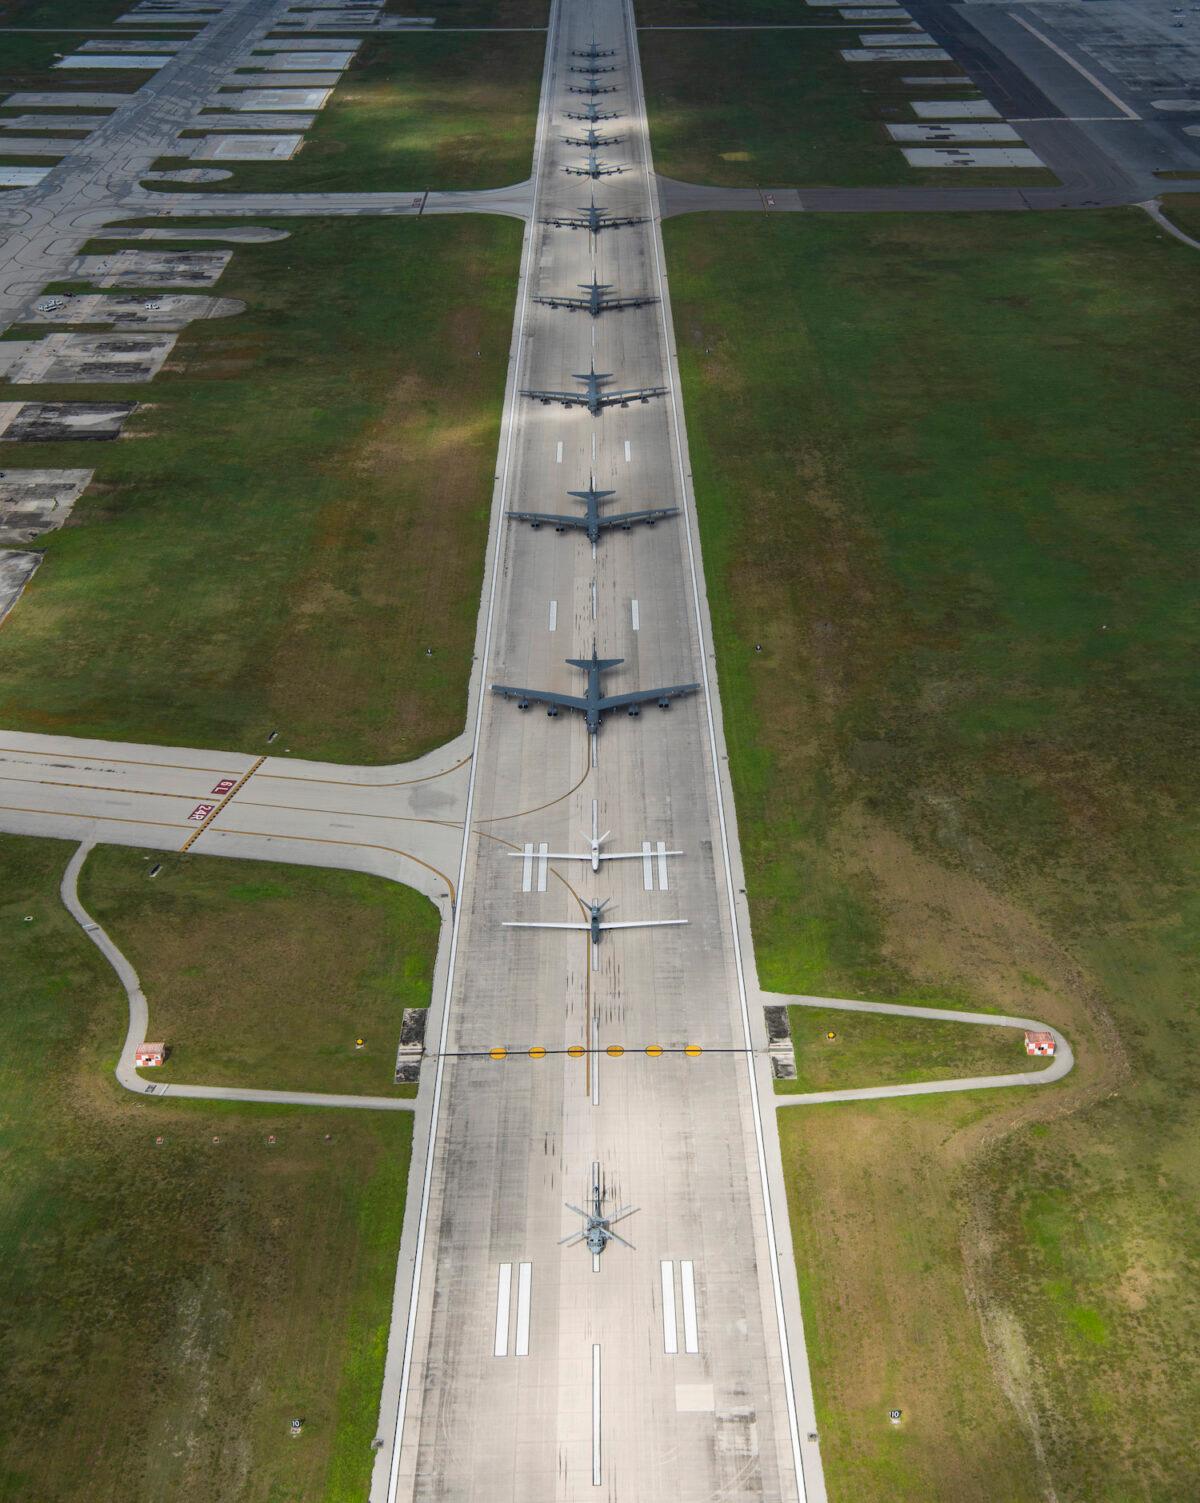 A U.S. Navy MH-60S Knighthawk, U.S. Air Force RQ-4 Global Hawk, Navy MQ-4C Triton, Air Force B-52 Stratofortress’, and KC-135 Stratotankers stationed at Andersen Air Force Base, Guam, perform an "Elephant Walk" April 13, 2020. (U.S. Air Force photo by Senior Airman Michael S. Murphy)